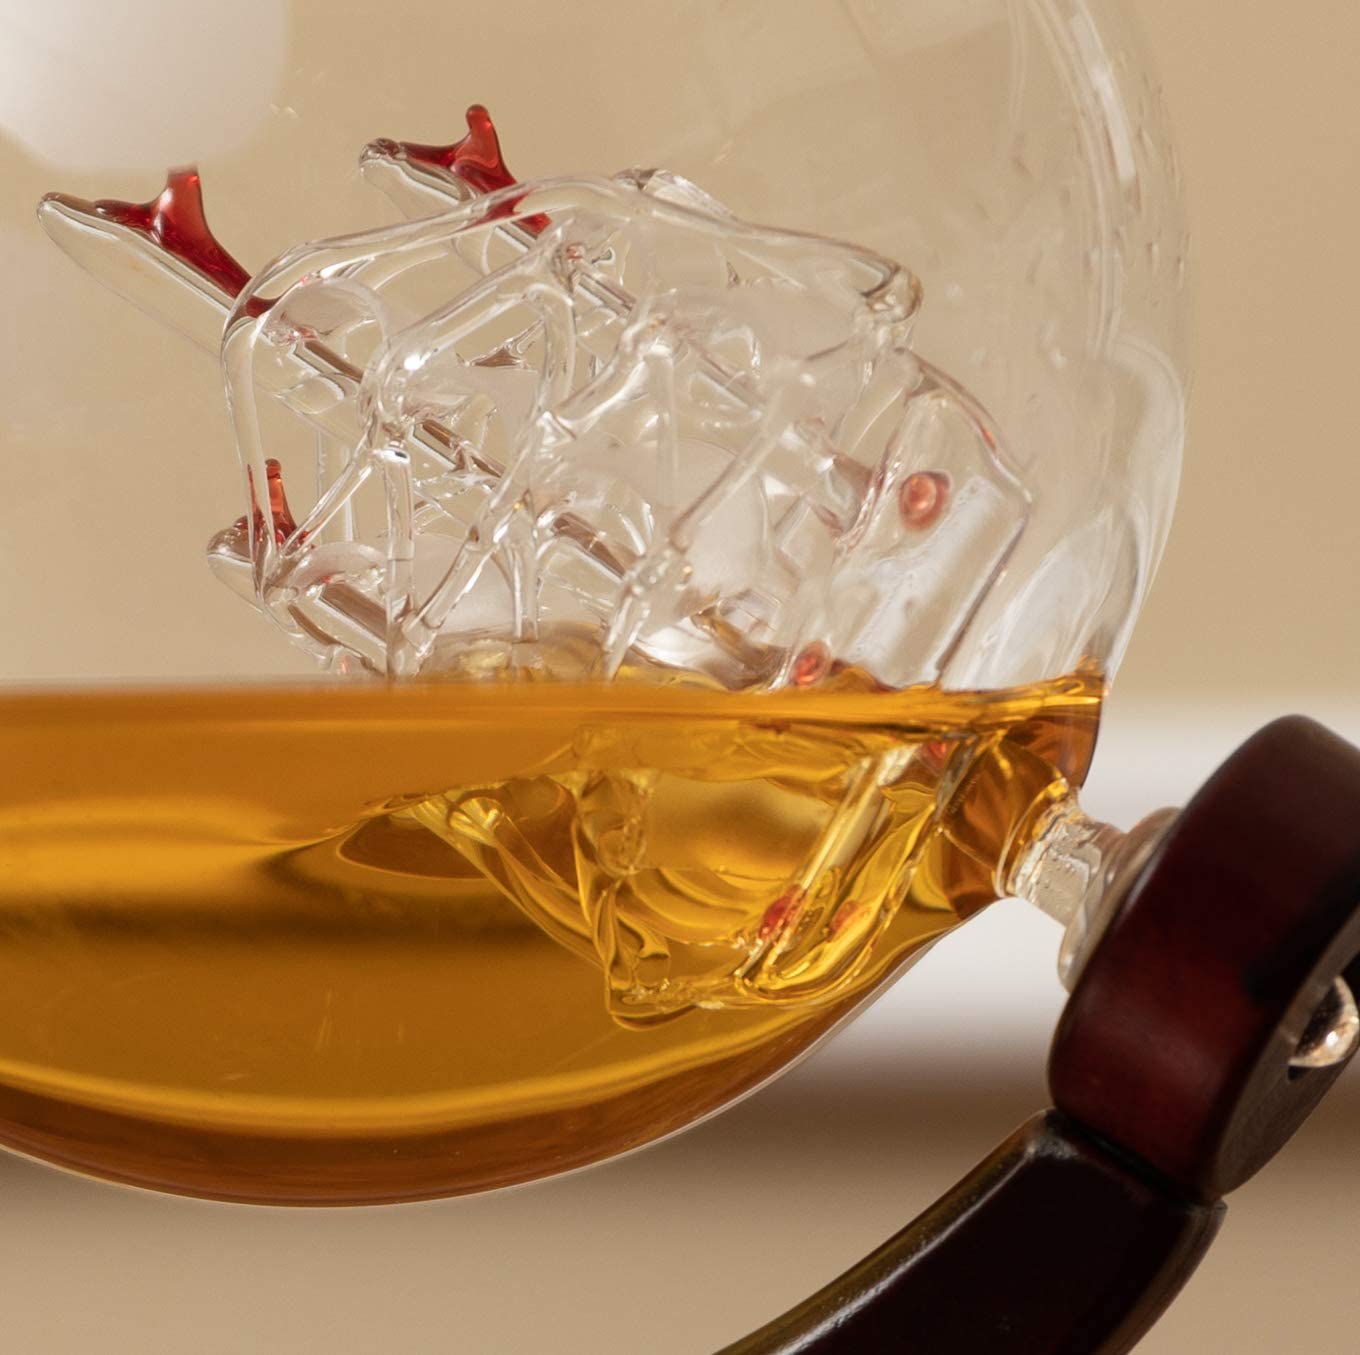 A close-up view of a glass ship inside a whiskey decanter. The ship floats when whiskey is inside the decanter.